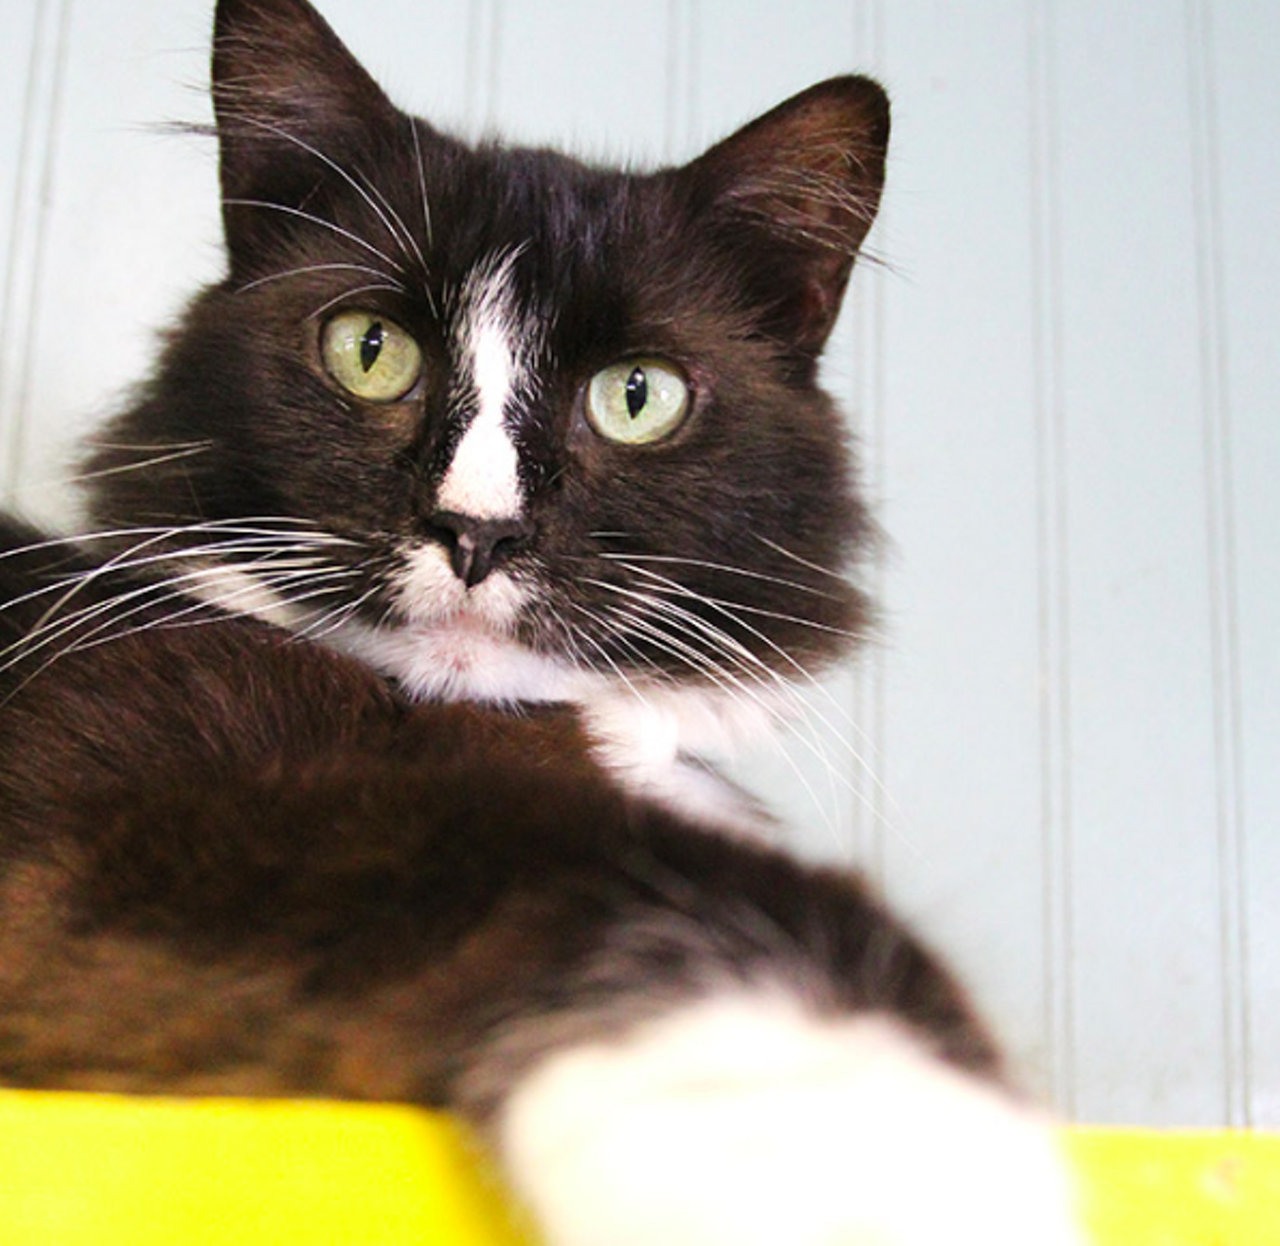 Catsup
"I’m a pretty little girl with a bashful heart. If you go slow I warm up real quickly. I really love chin scratches and hanging out up high where I can keep my eye on everything. I would be the perfect “condiment” to anyone so come adopt me today!"